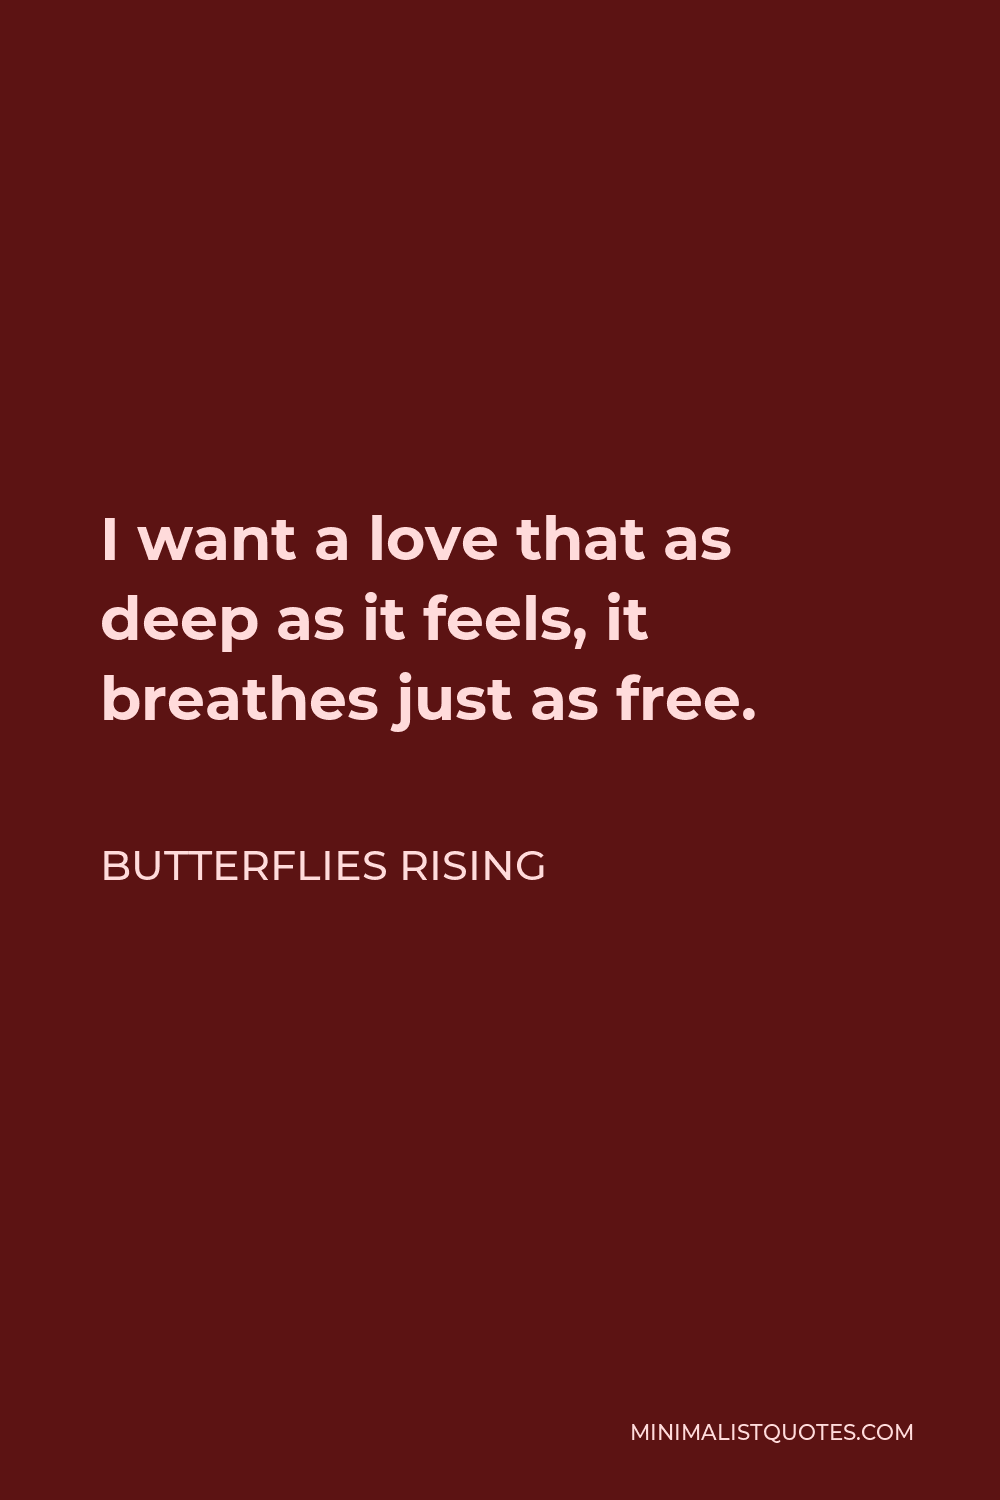 Butterflies Rising Quote - I want a love that as deep as it feels, it breathes just as free.